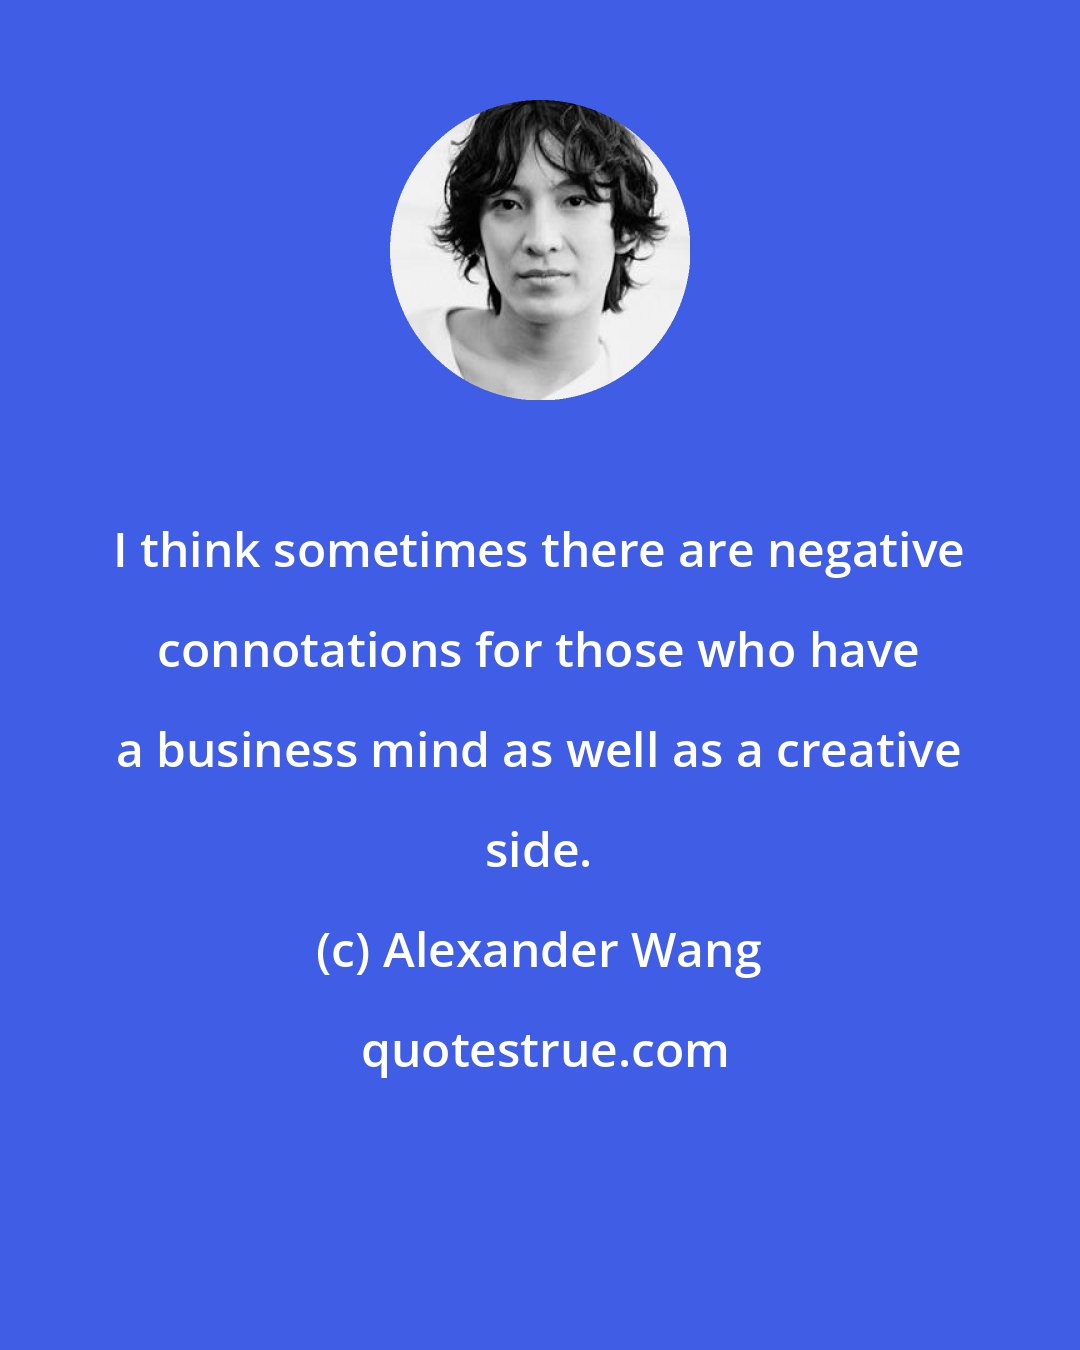 Alexander Wang: I think sometimes there are negative connotations for those who have a business mind as well as a creative side.